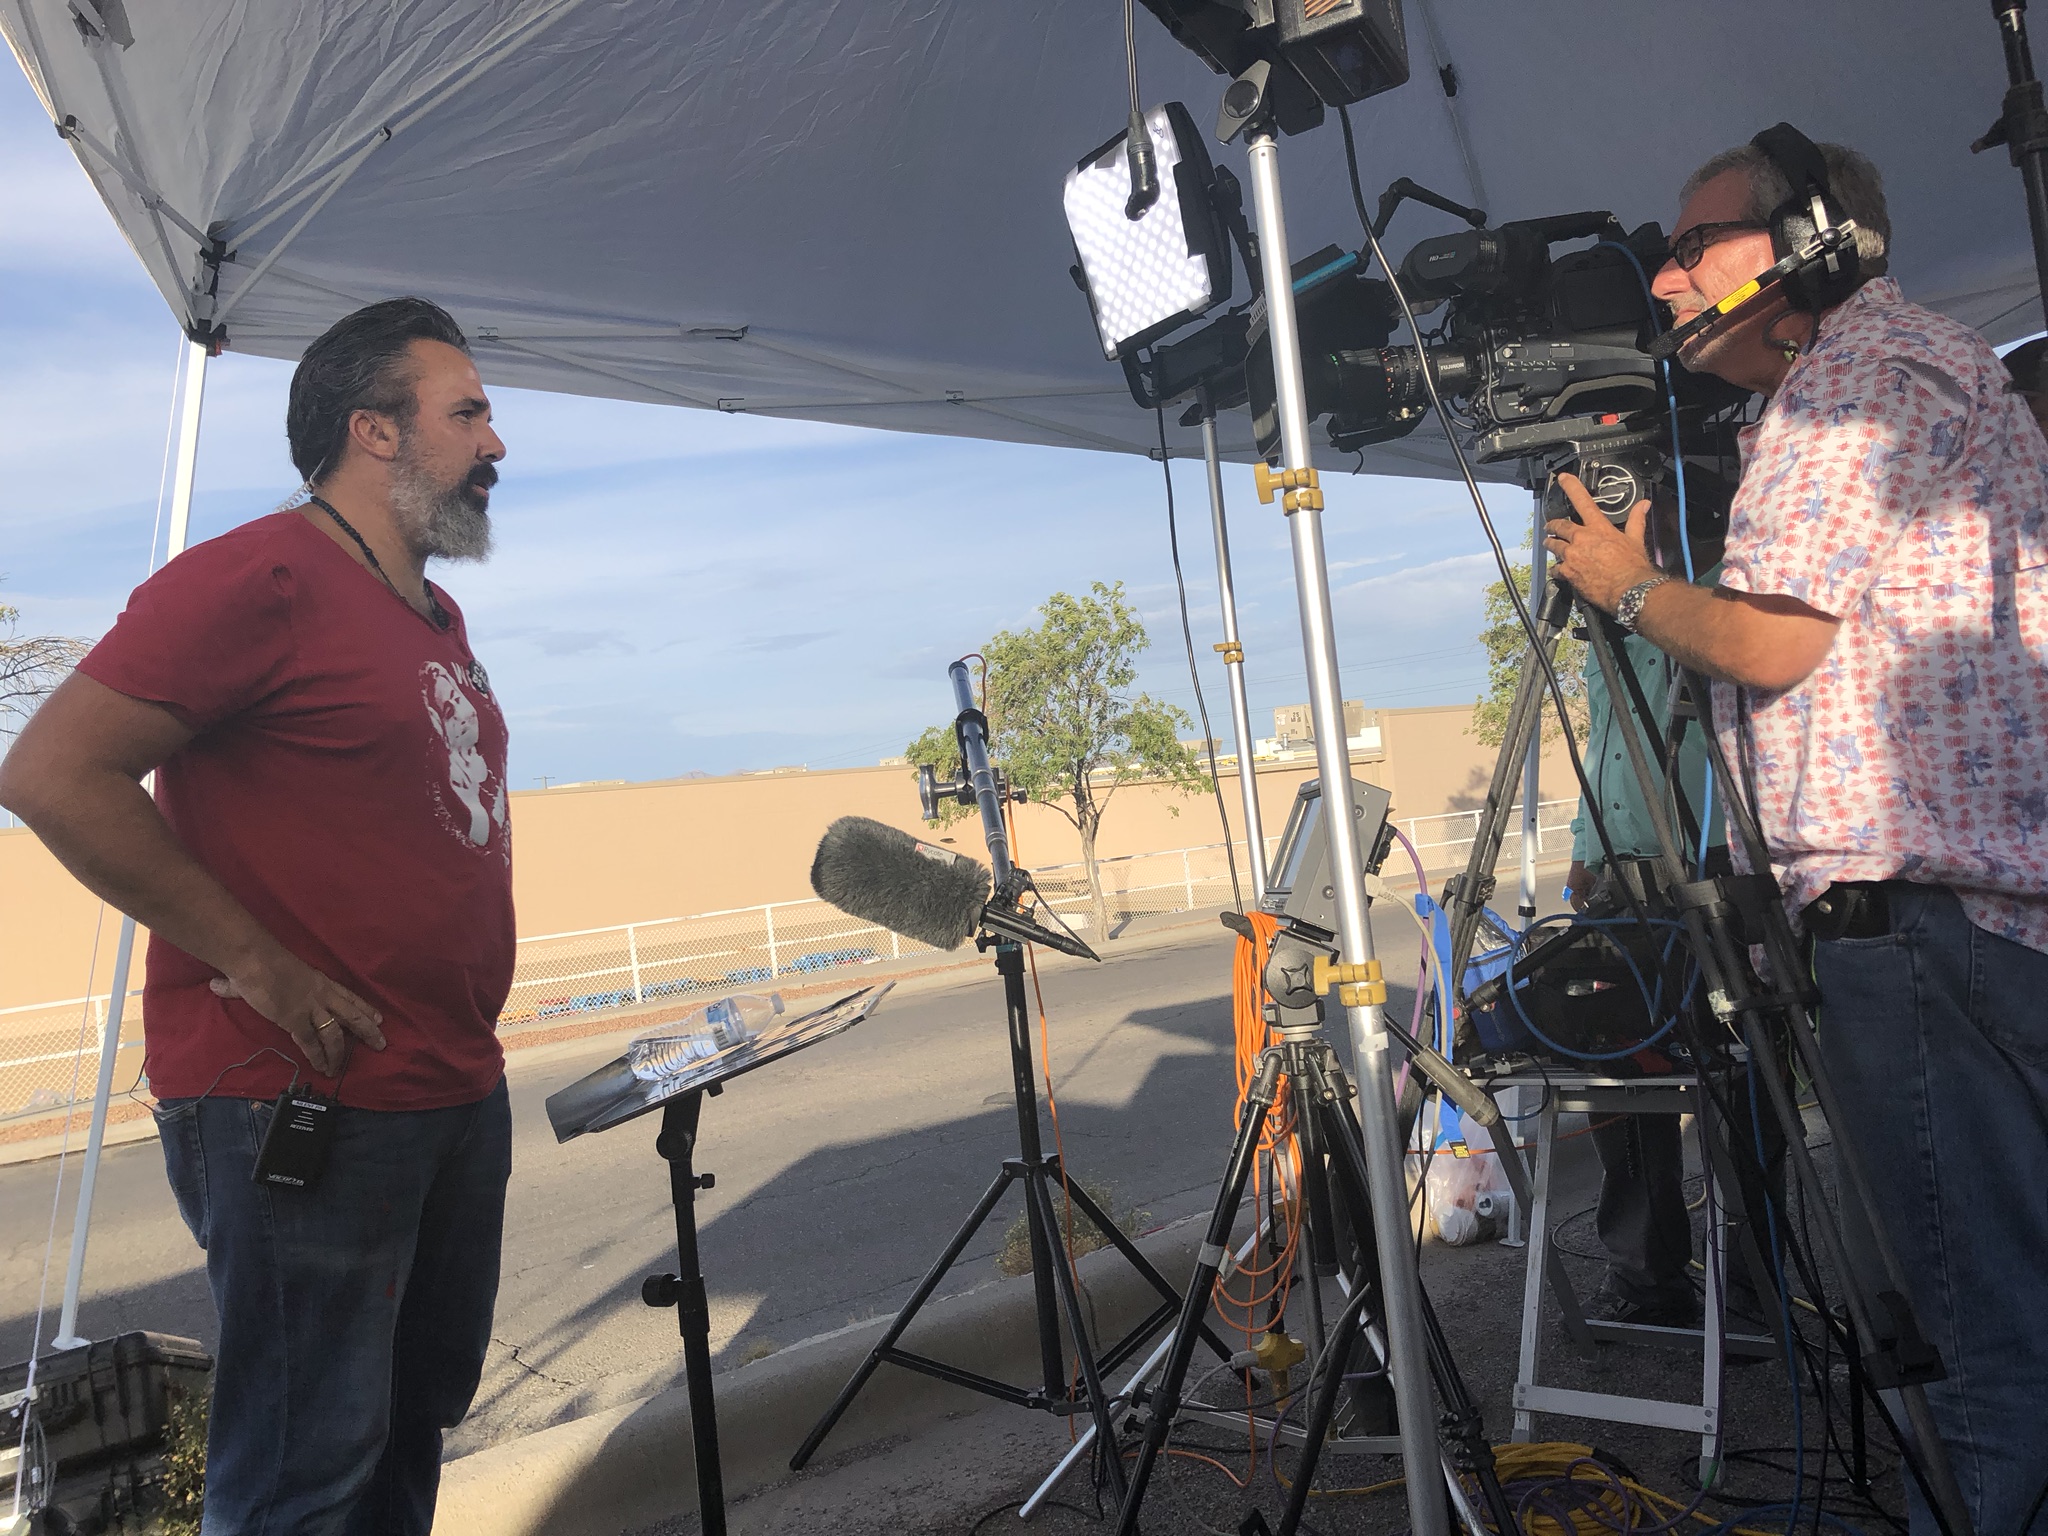 Parkland Parents in El Paso During Mass Shooting